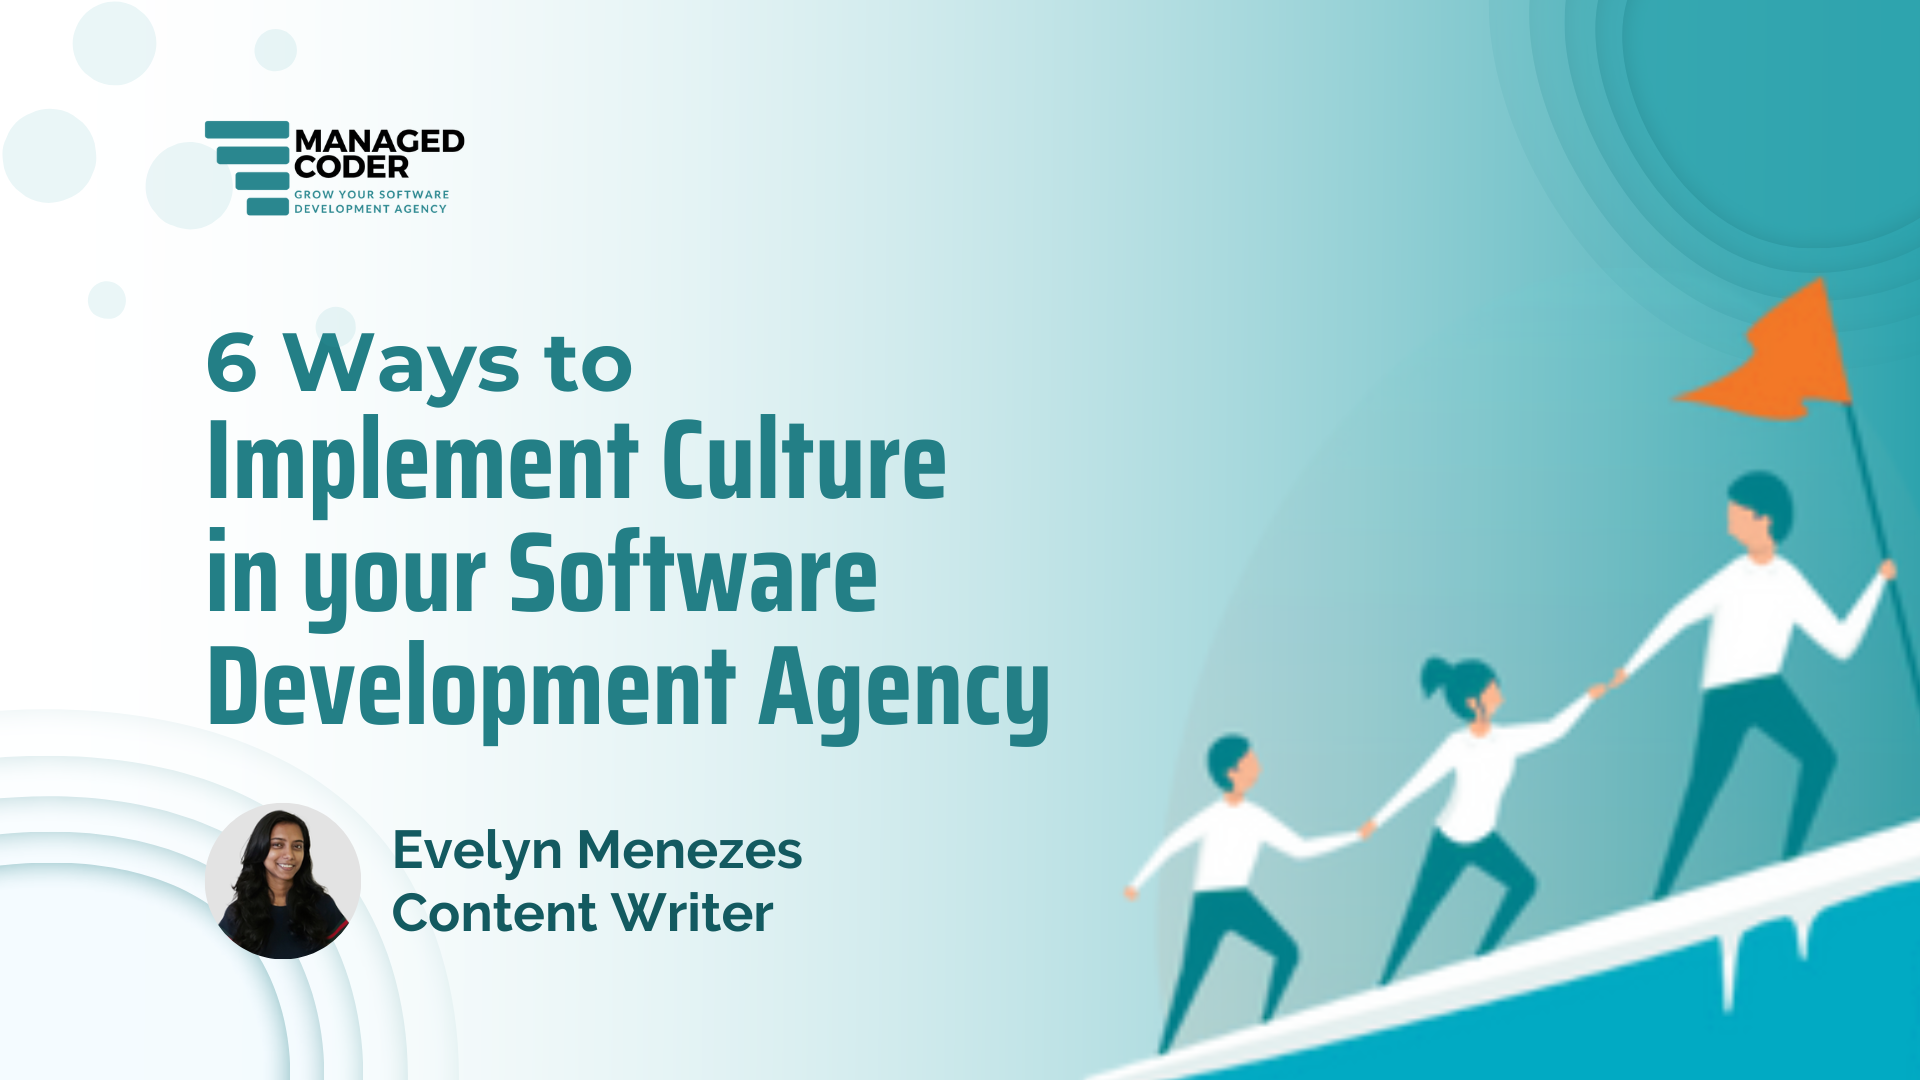 6 Ways to Implement Culture in your Software Development Agency - ManagedCoder